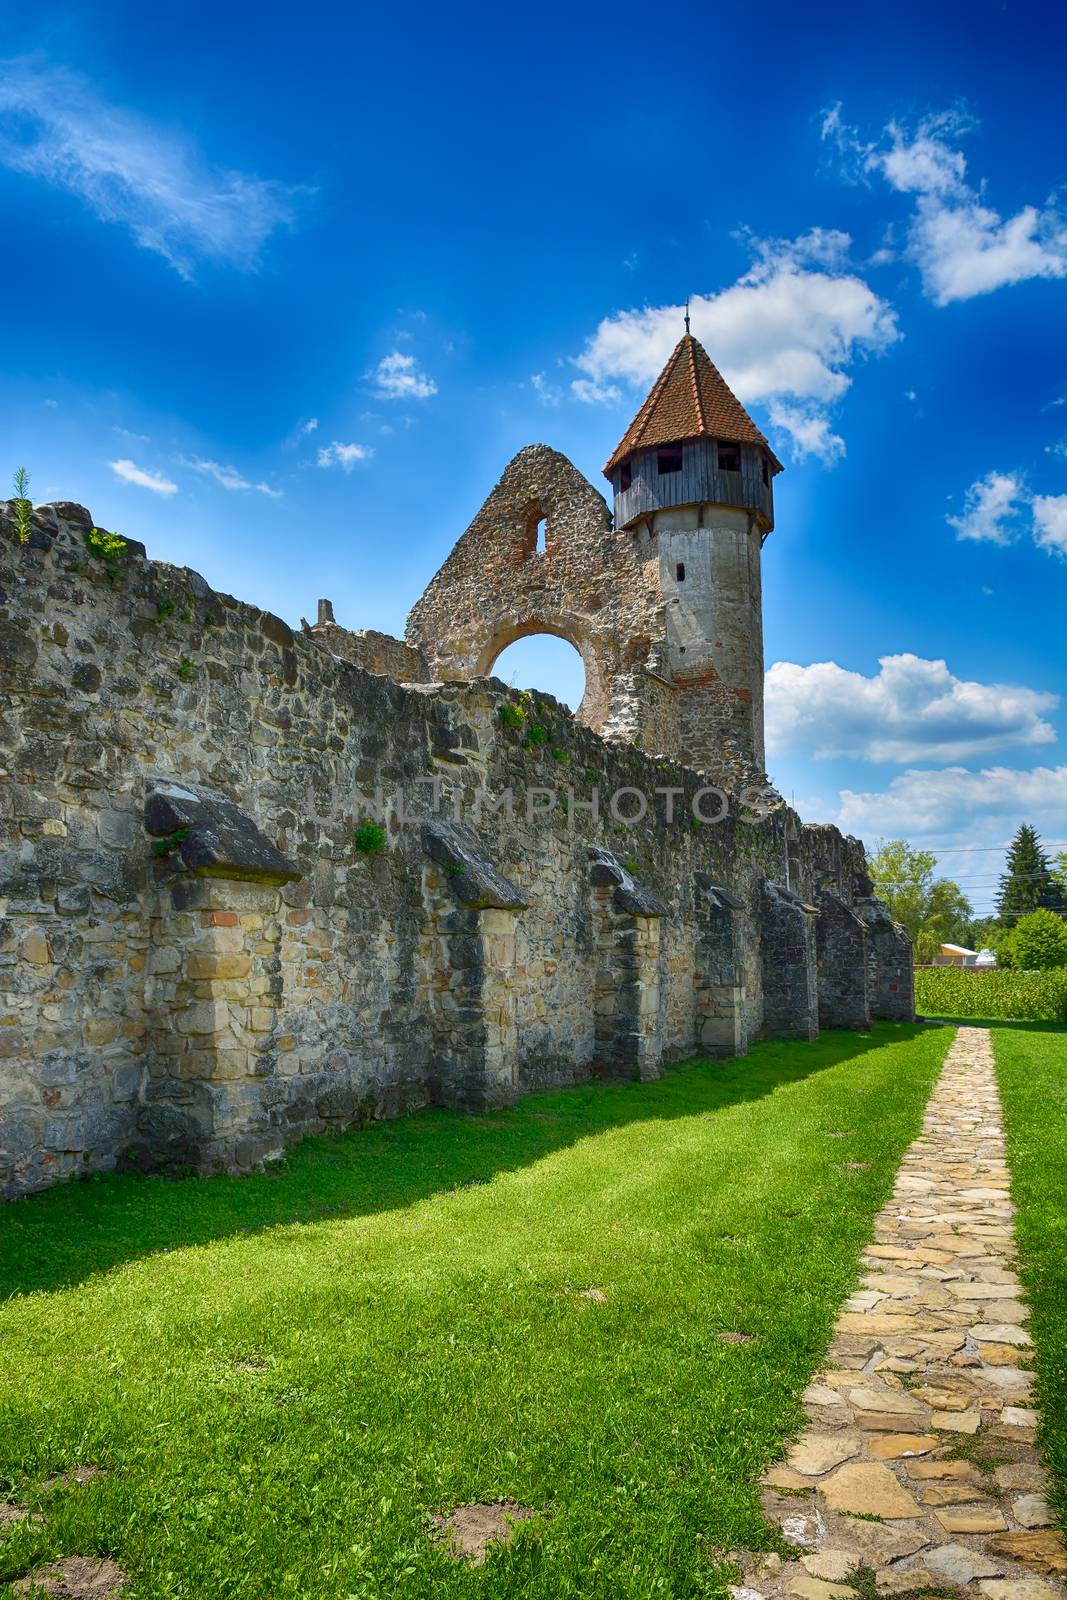 Cârţa Monastery is a former Cistercian (Benedictine) monastery in the Ţara Făgăraşului region in southern Transylvania. The monastery was probably founded in 1202-1206 by monks from Igriș abbey (daughter house of Pontigny abbey)